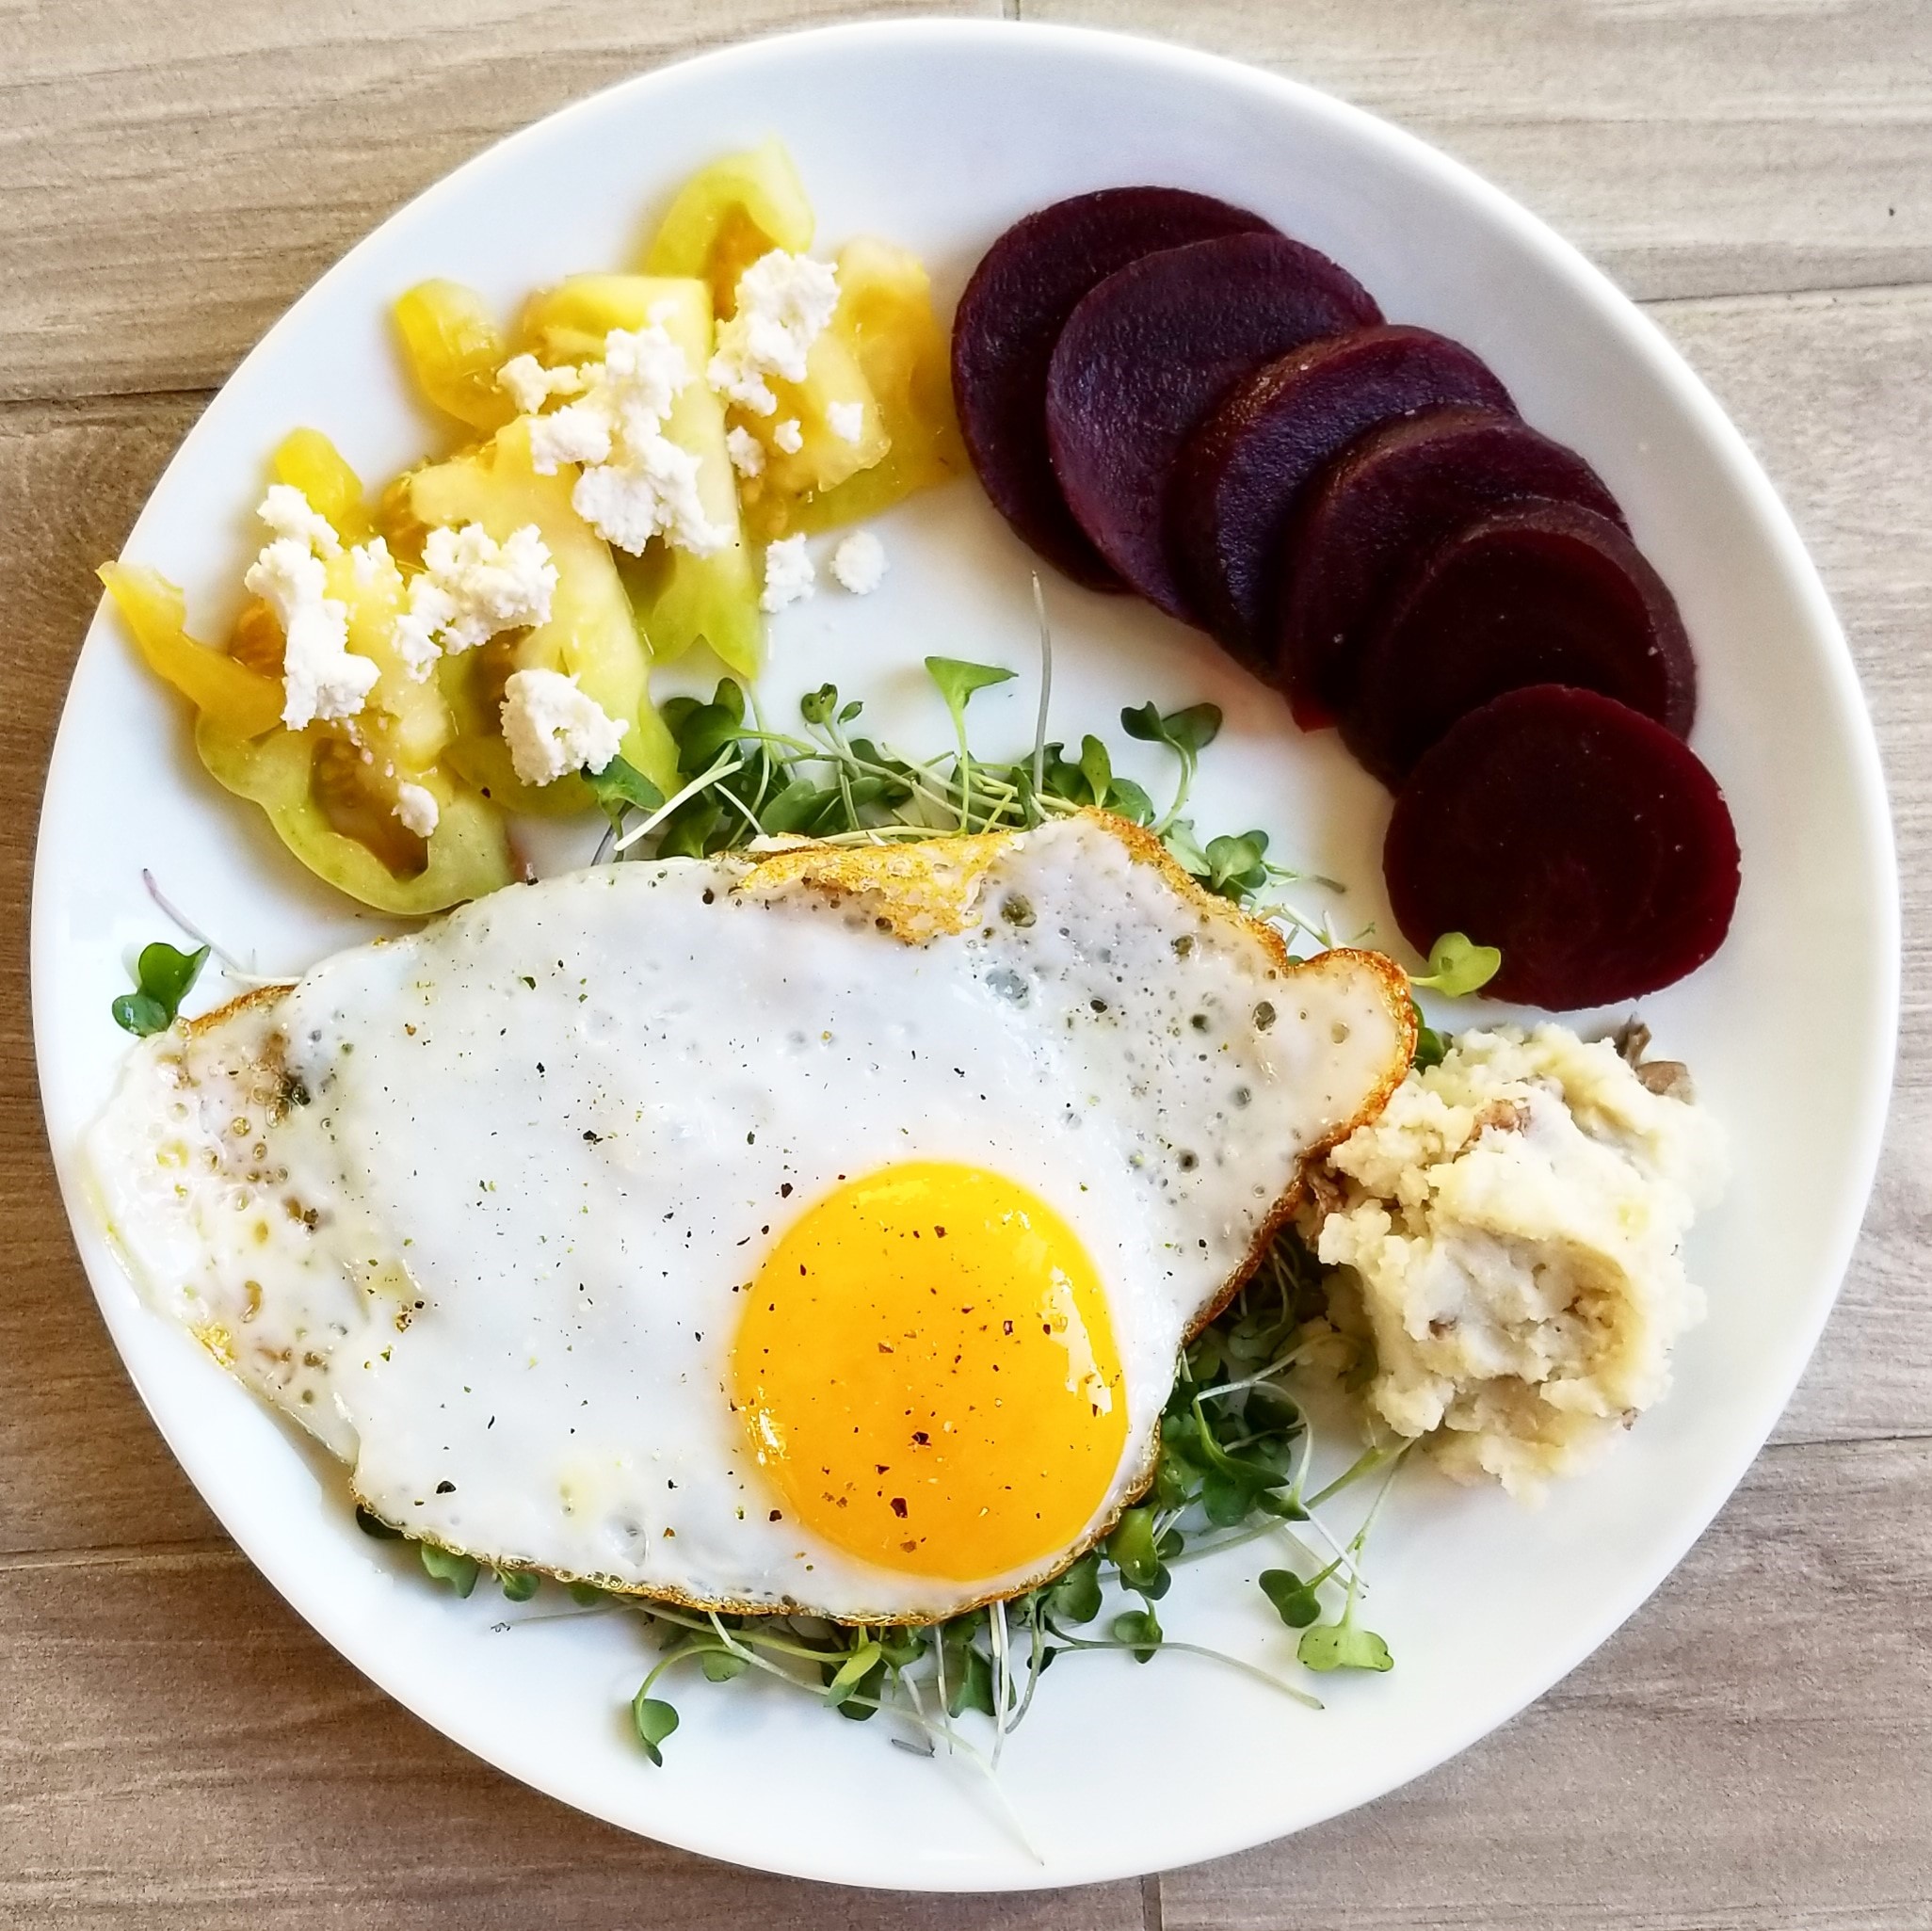 Eggs over easy and Beats